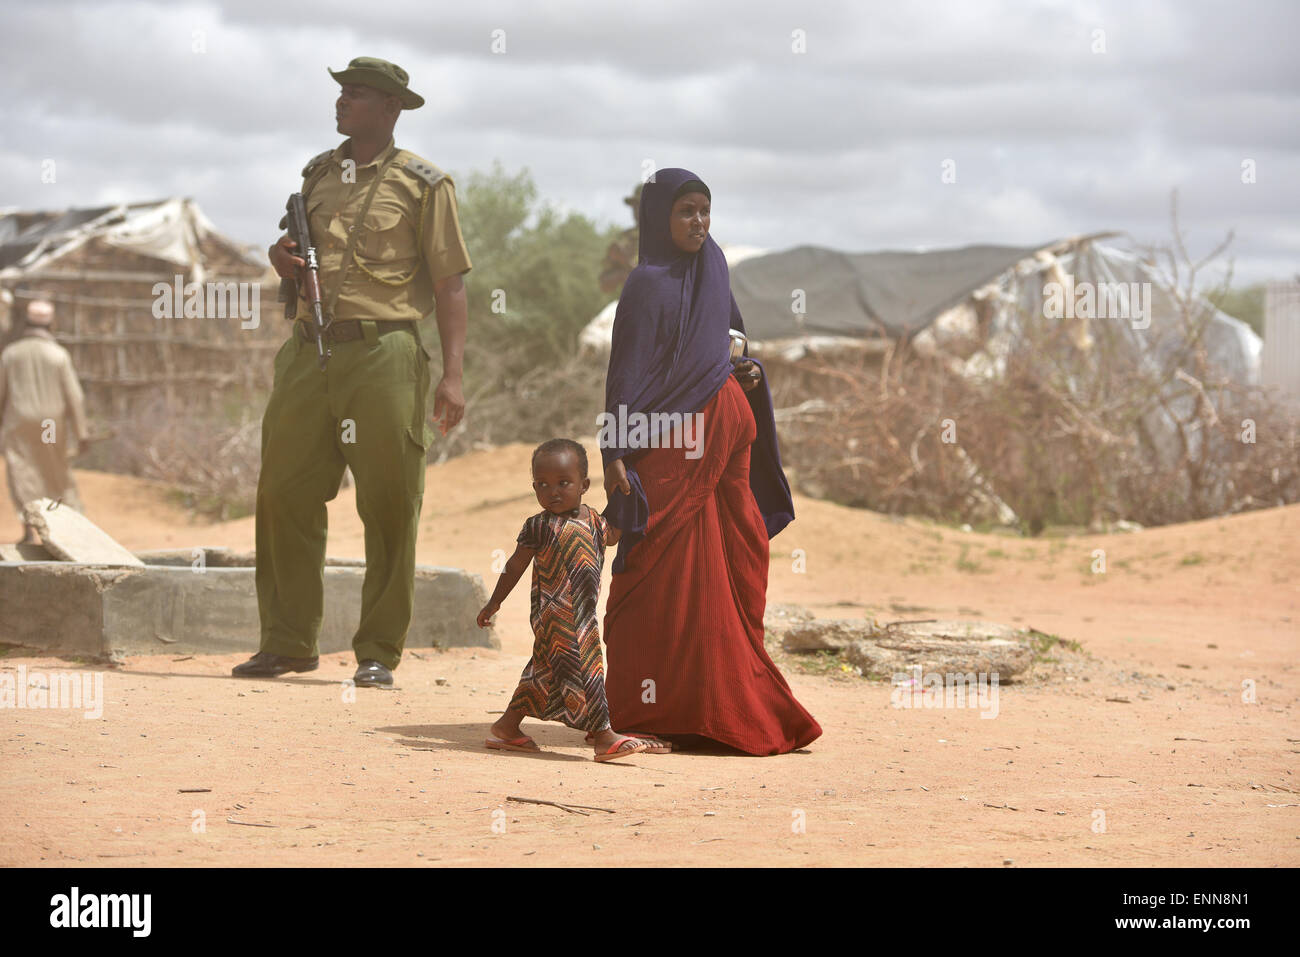 (150508) --DADAAB, May 8, 2015 (Xinhua) -- A refugee mother and her child walk past an armed police at Dadaab refugee camp in Kenya, May 8, 2015. Dadaab, the world's largest refugee camp in northeastern Kenya, currently houses some 350,000 people. For more than 20 years, it has been home to generations of Somalis who have fled their homeland wracked by conflicts. (Xinhua/Sun Ruibo) Stock Photo